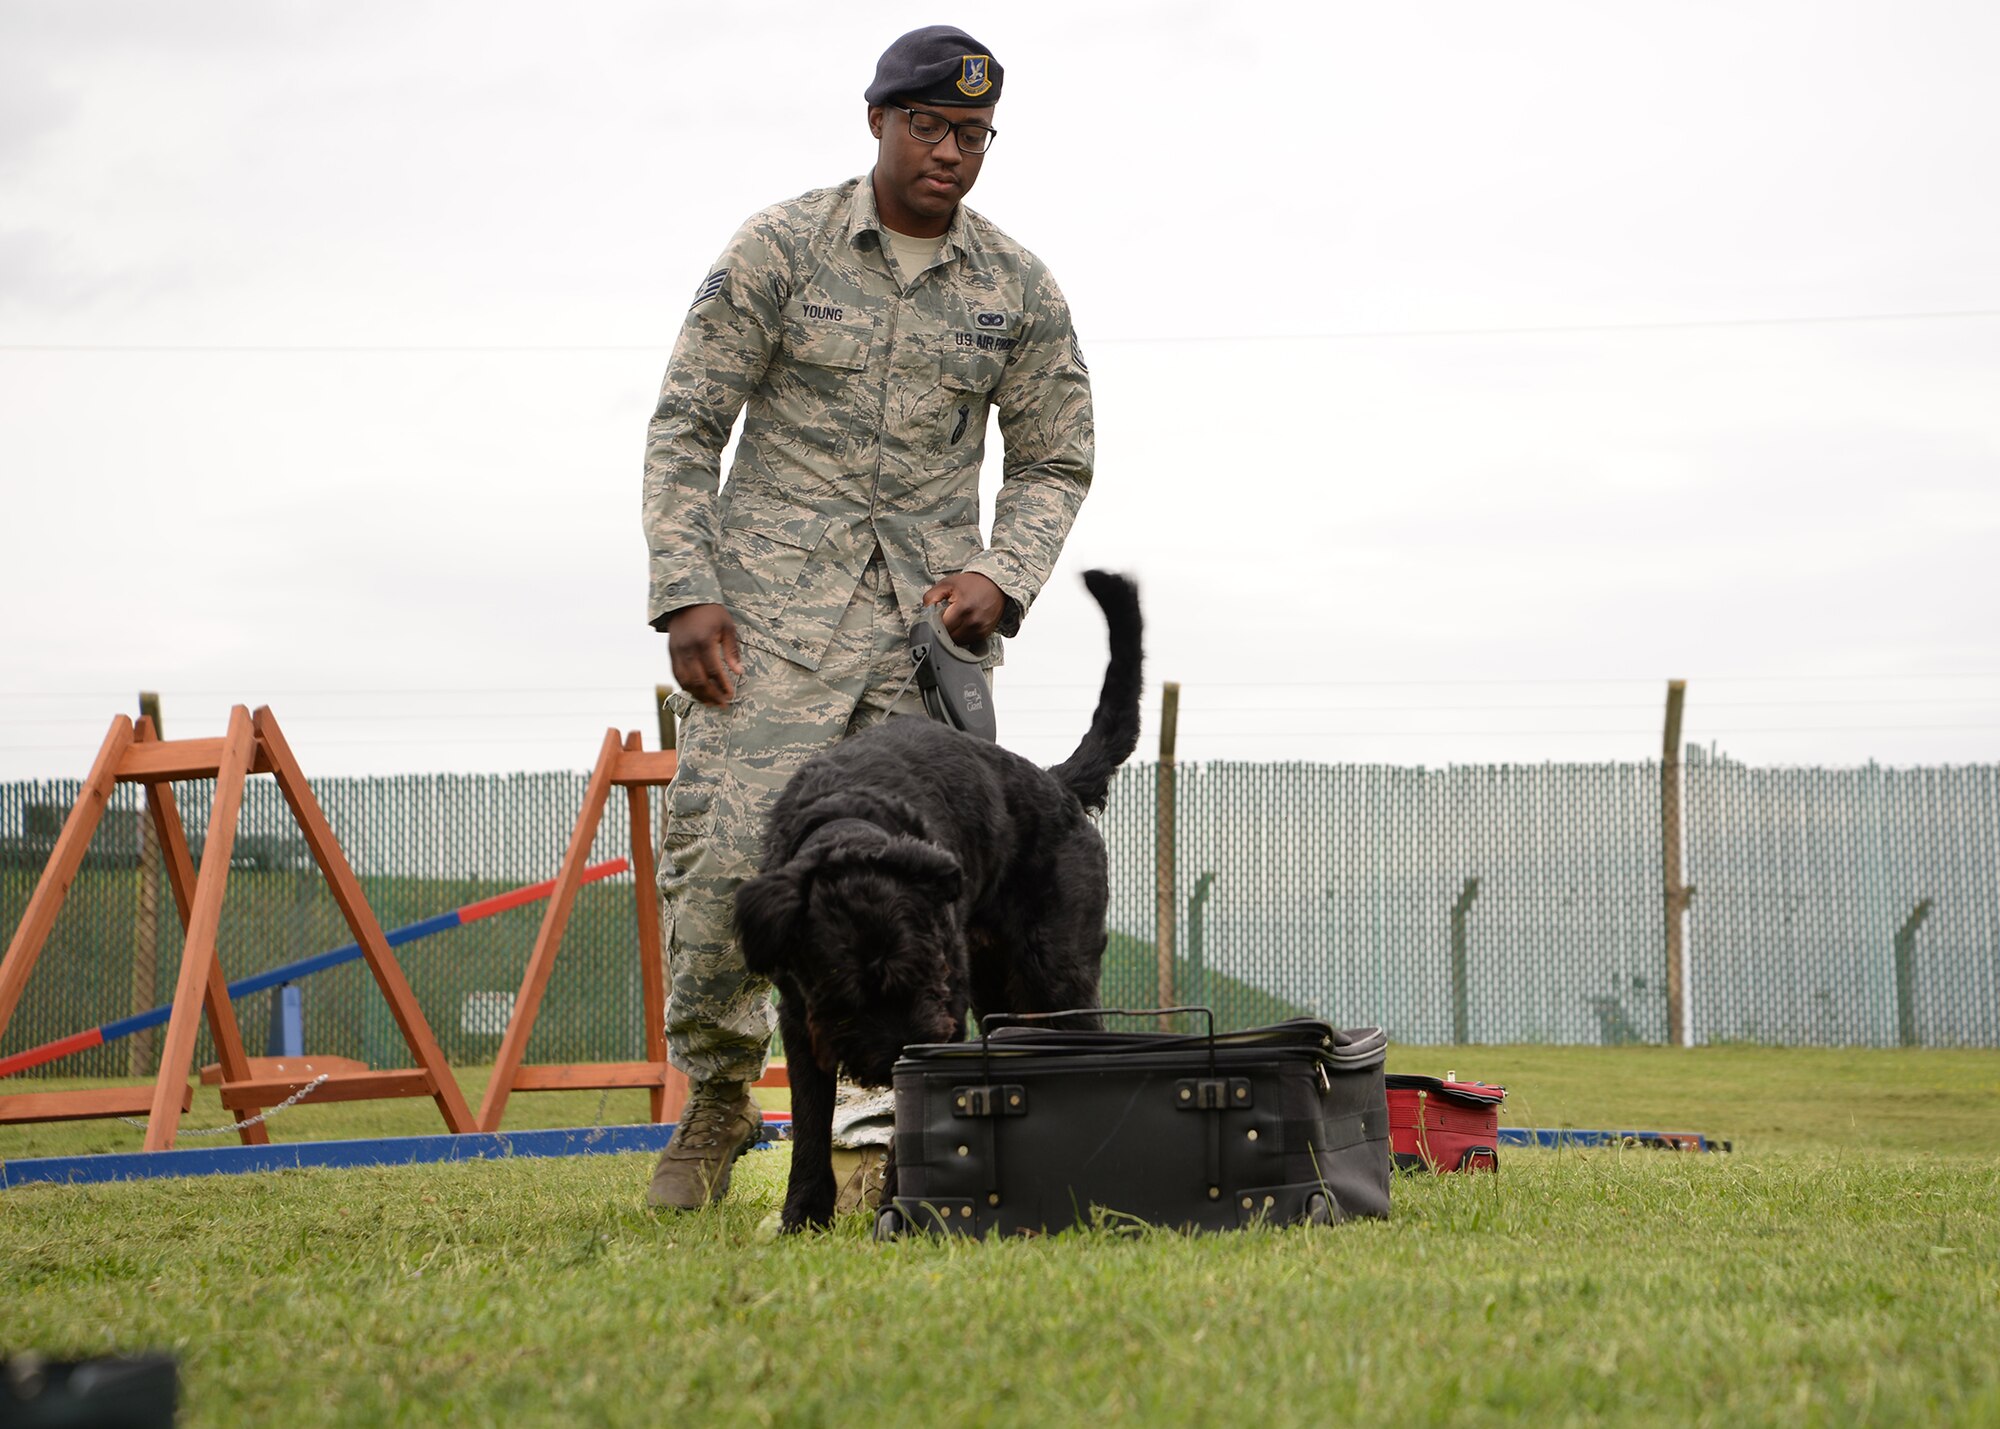 U.S. Air Force Staff Sgt. Dominick Young, 100th Security Forces Squadron Military Working Dog handler, and MWD Brock, a Giant Schnauzer, perform odor detection training July 11, 2017, on RAF Mildenhall, England. Brock is the only Giant Schnauzer military working dog in the Department of Defense. This breed of dog was used in World War II, then not again until the early 1980s. He is the first one to be brought into the DOD since that time. (U.S. Air Force photo by Karen Abeyasekere)